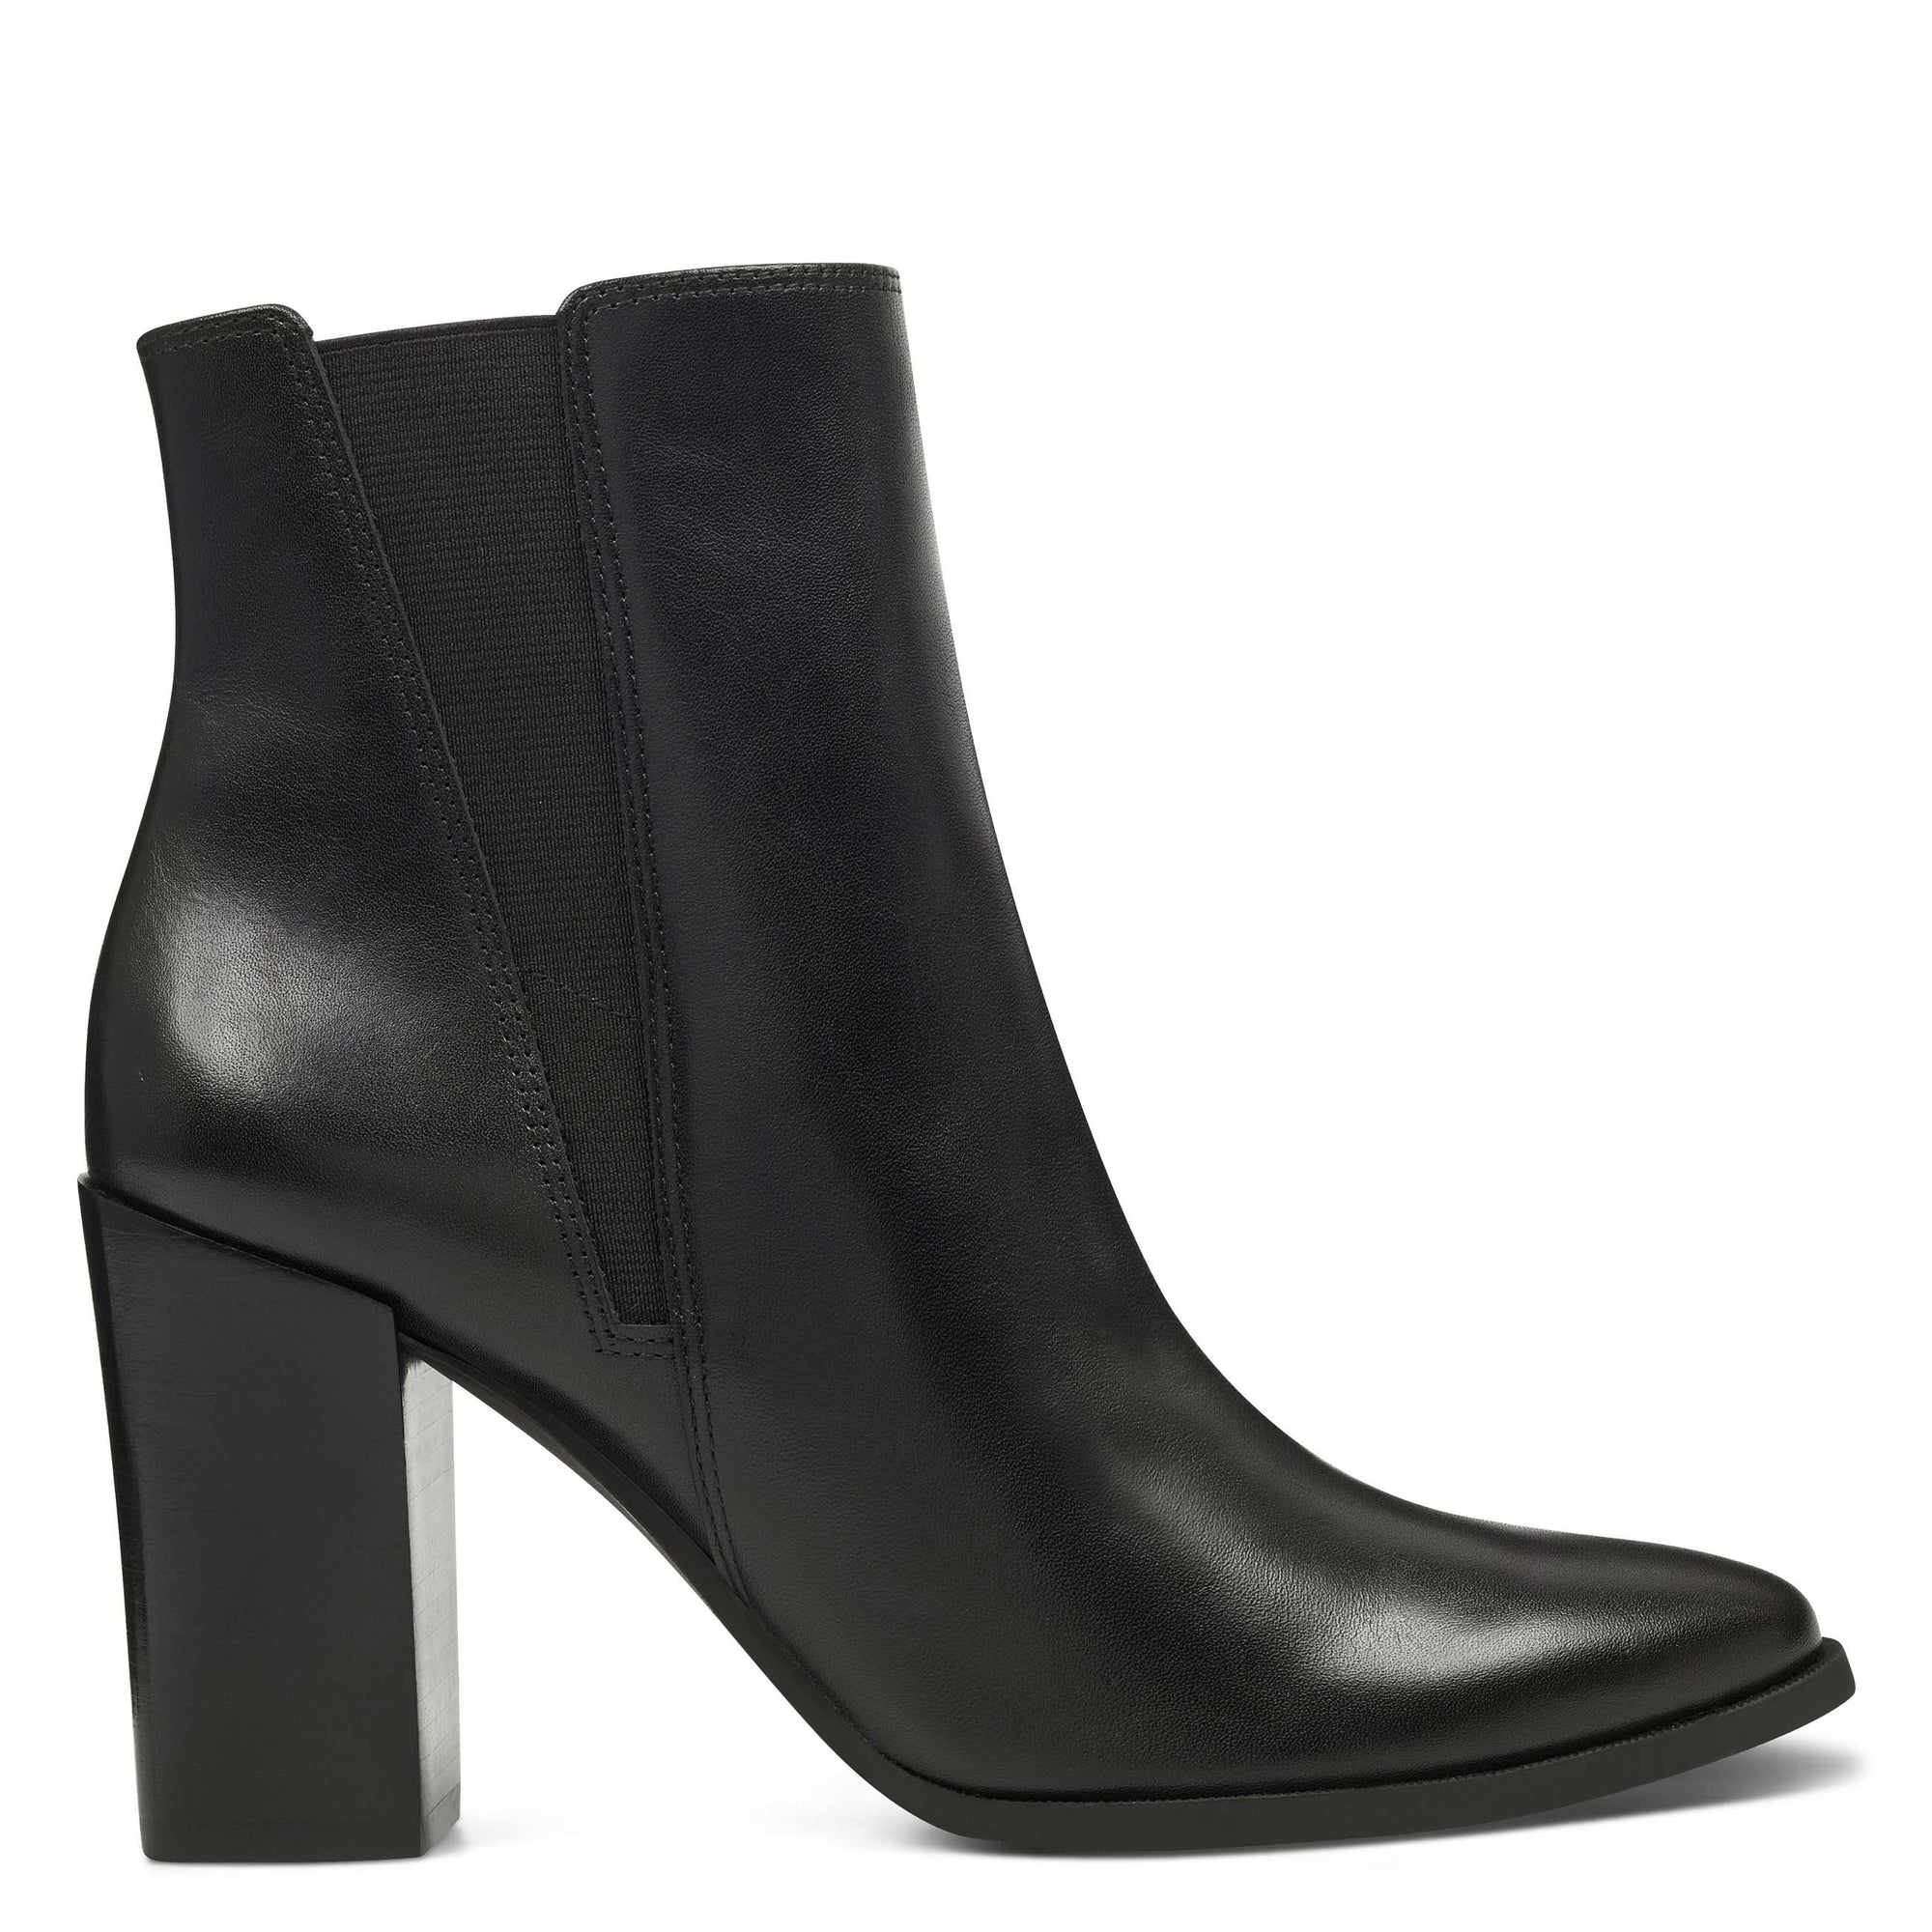 long black leather heeled boots